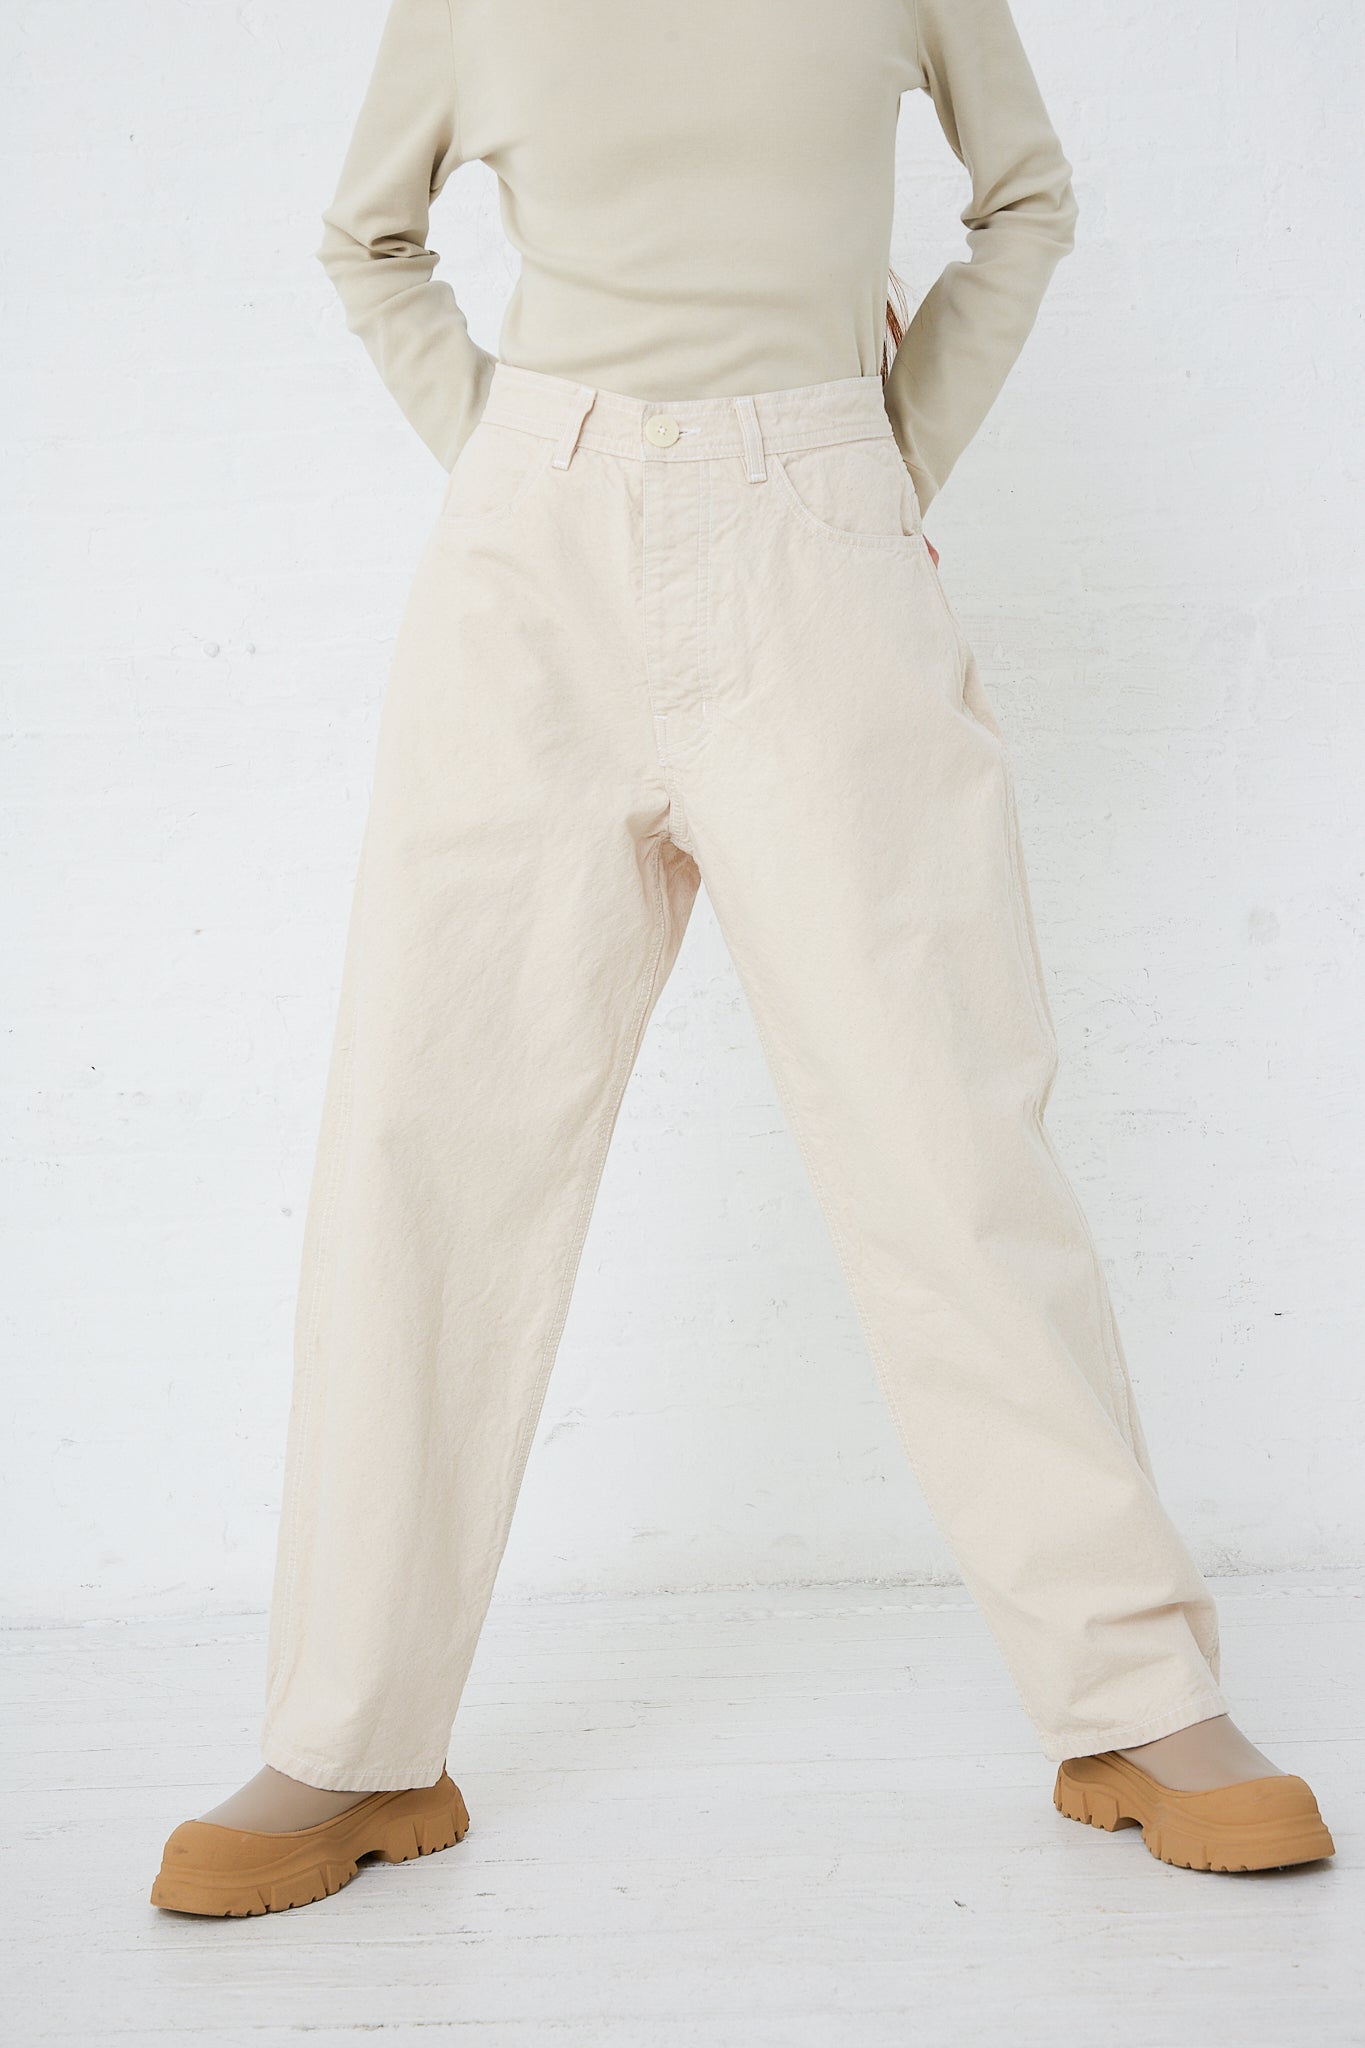 A woman wearing beige Jesse Kamm relaxed-fit pants and an organic cotton tee shirt.